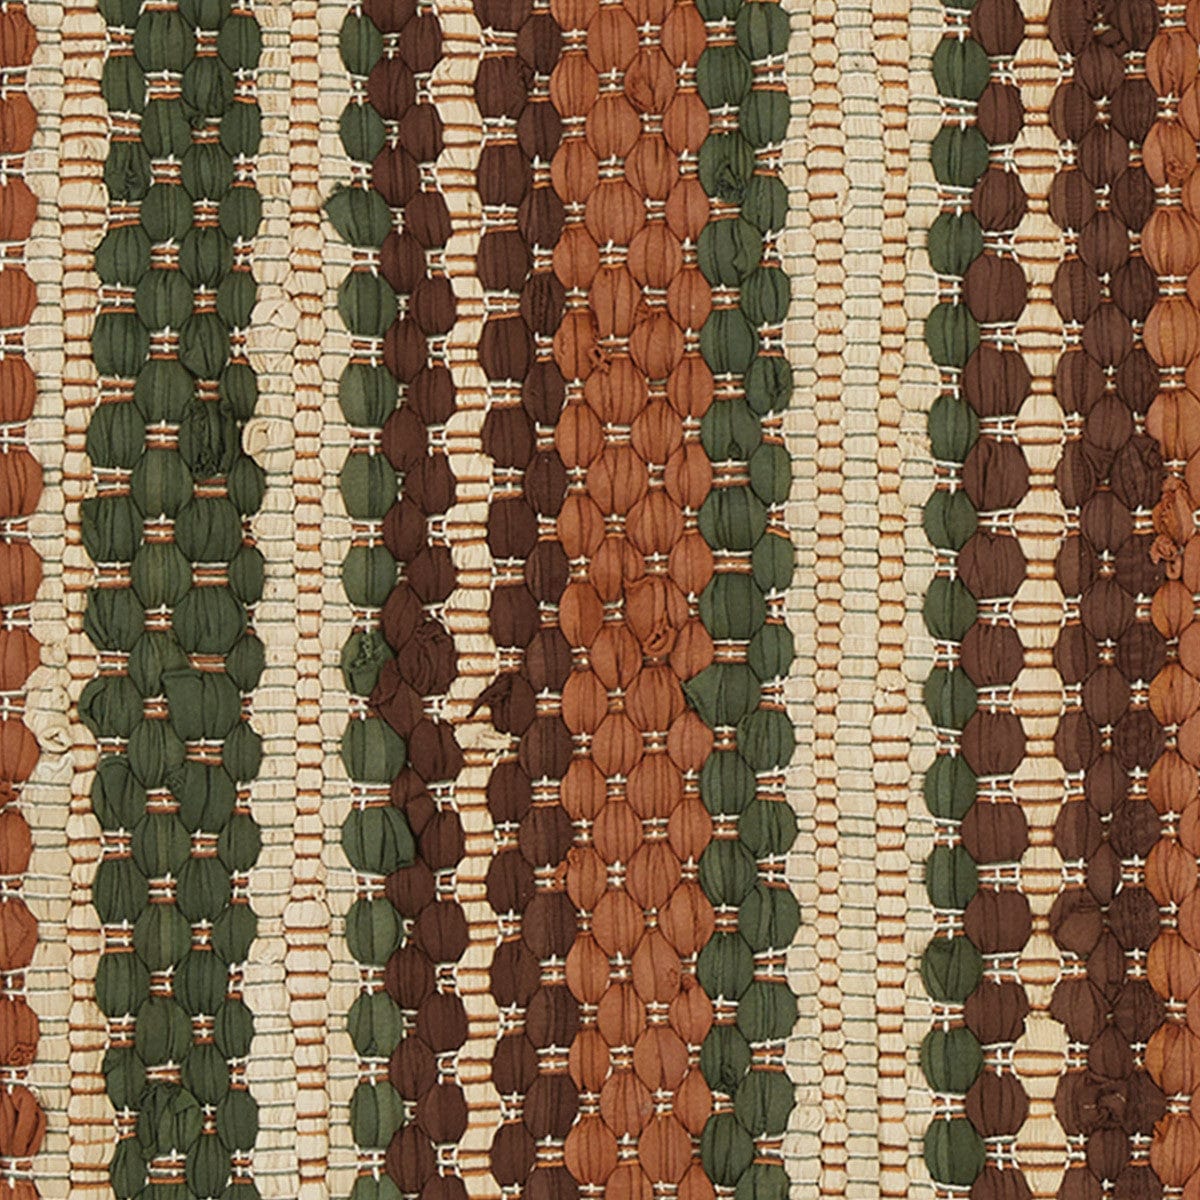 Woodbourne Woven Chindi Rag Rug Runner 24&quot; X 72&quot; Rectangle